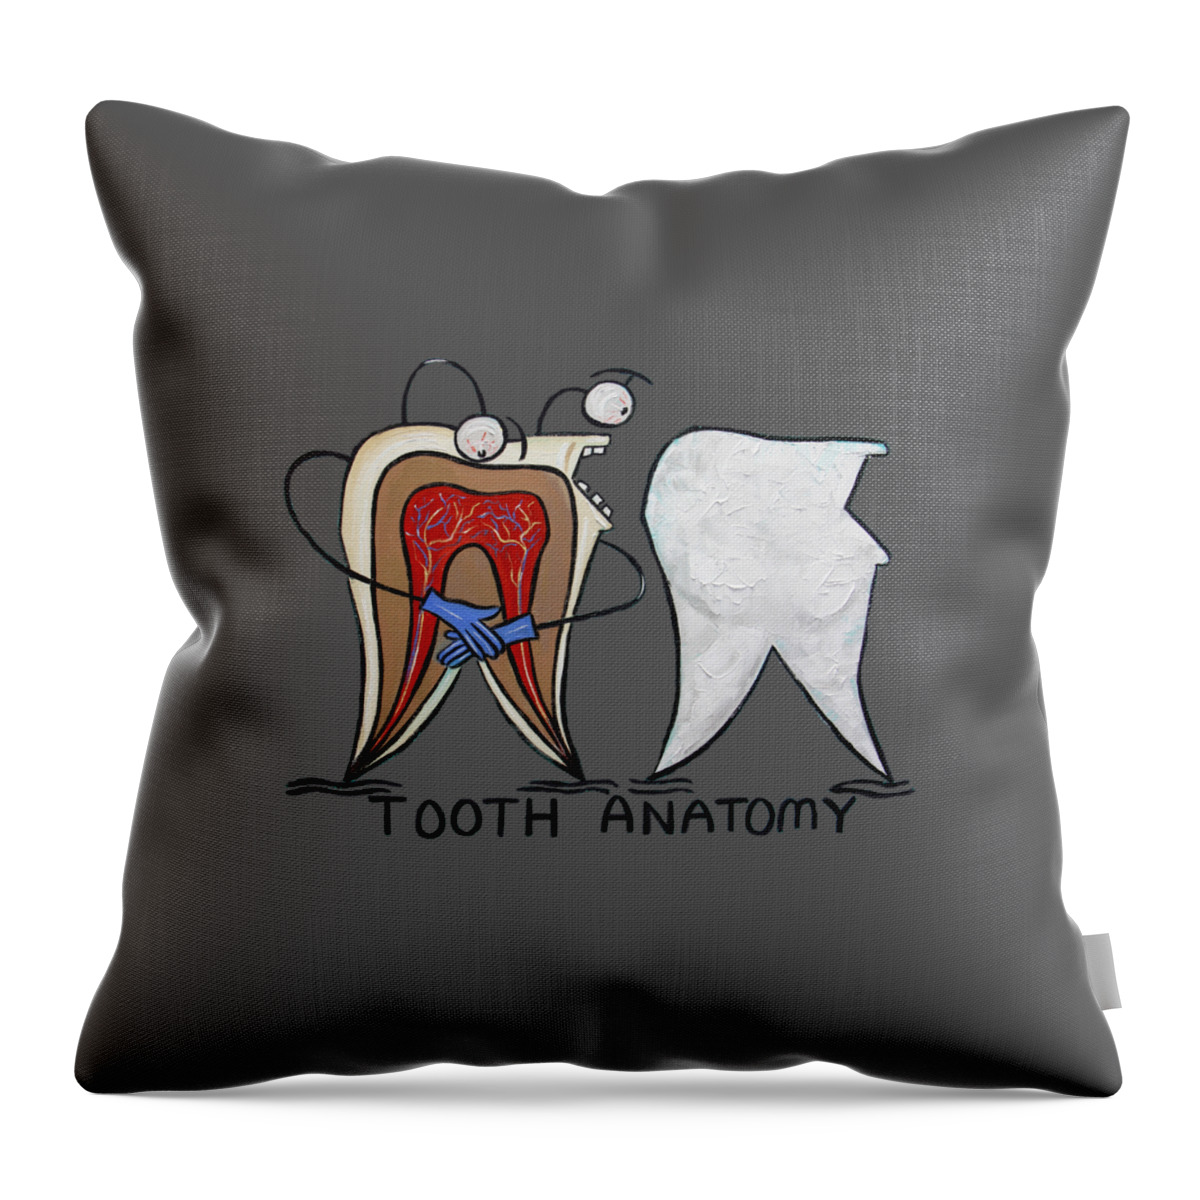 Tooth Anatomy T-shirt Throw Pillow featuring the painting Tooth Anatomy T-Shirt by Anthony Falbo